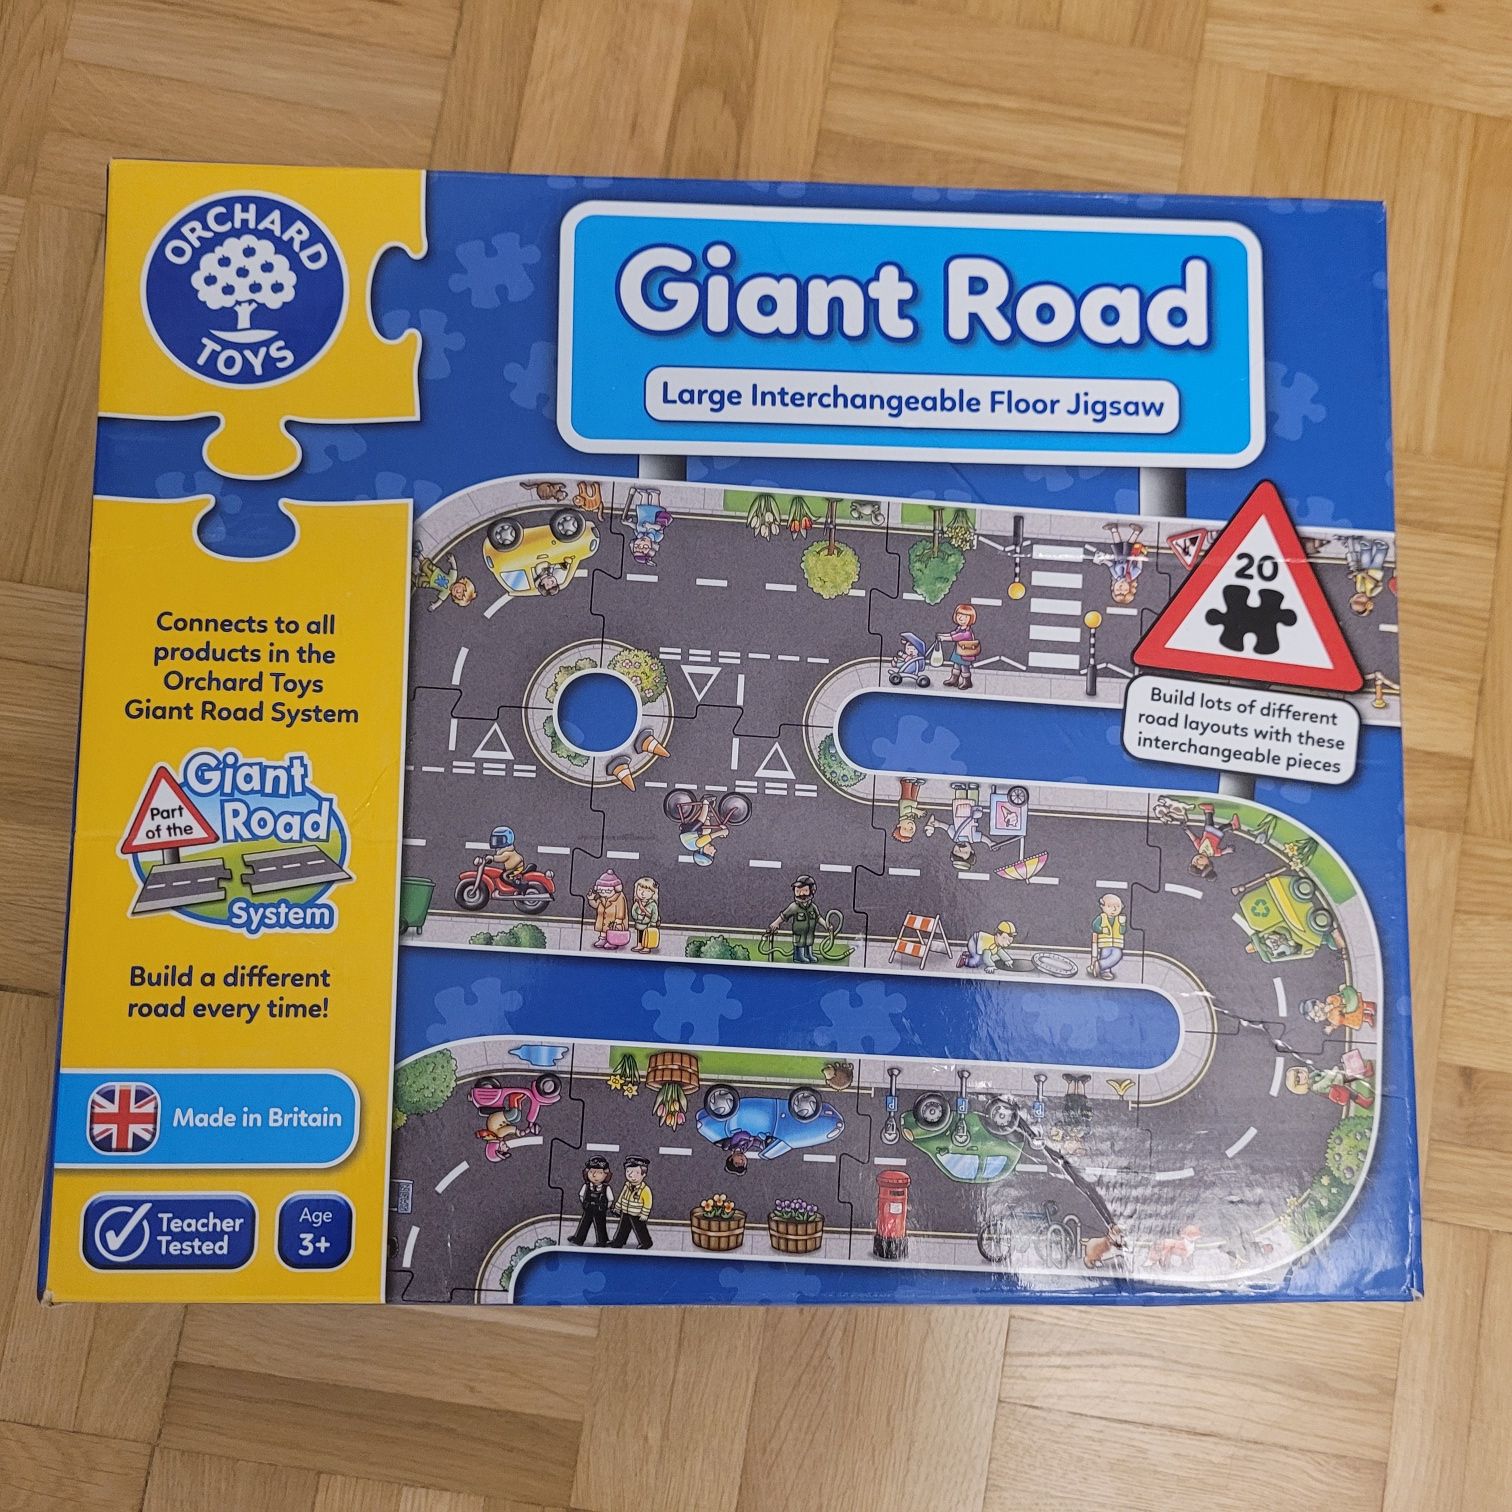 Orchard Toys Giant Road ulica droga puzzle obserwacyjne